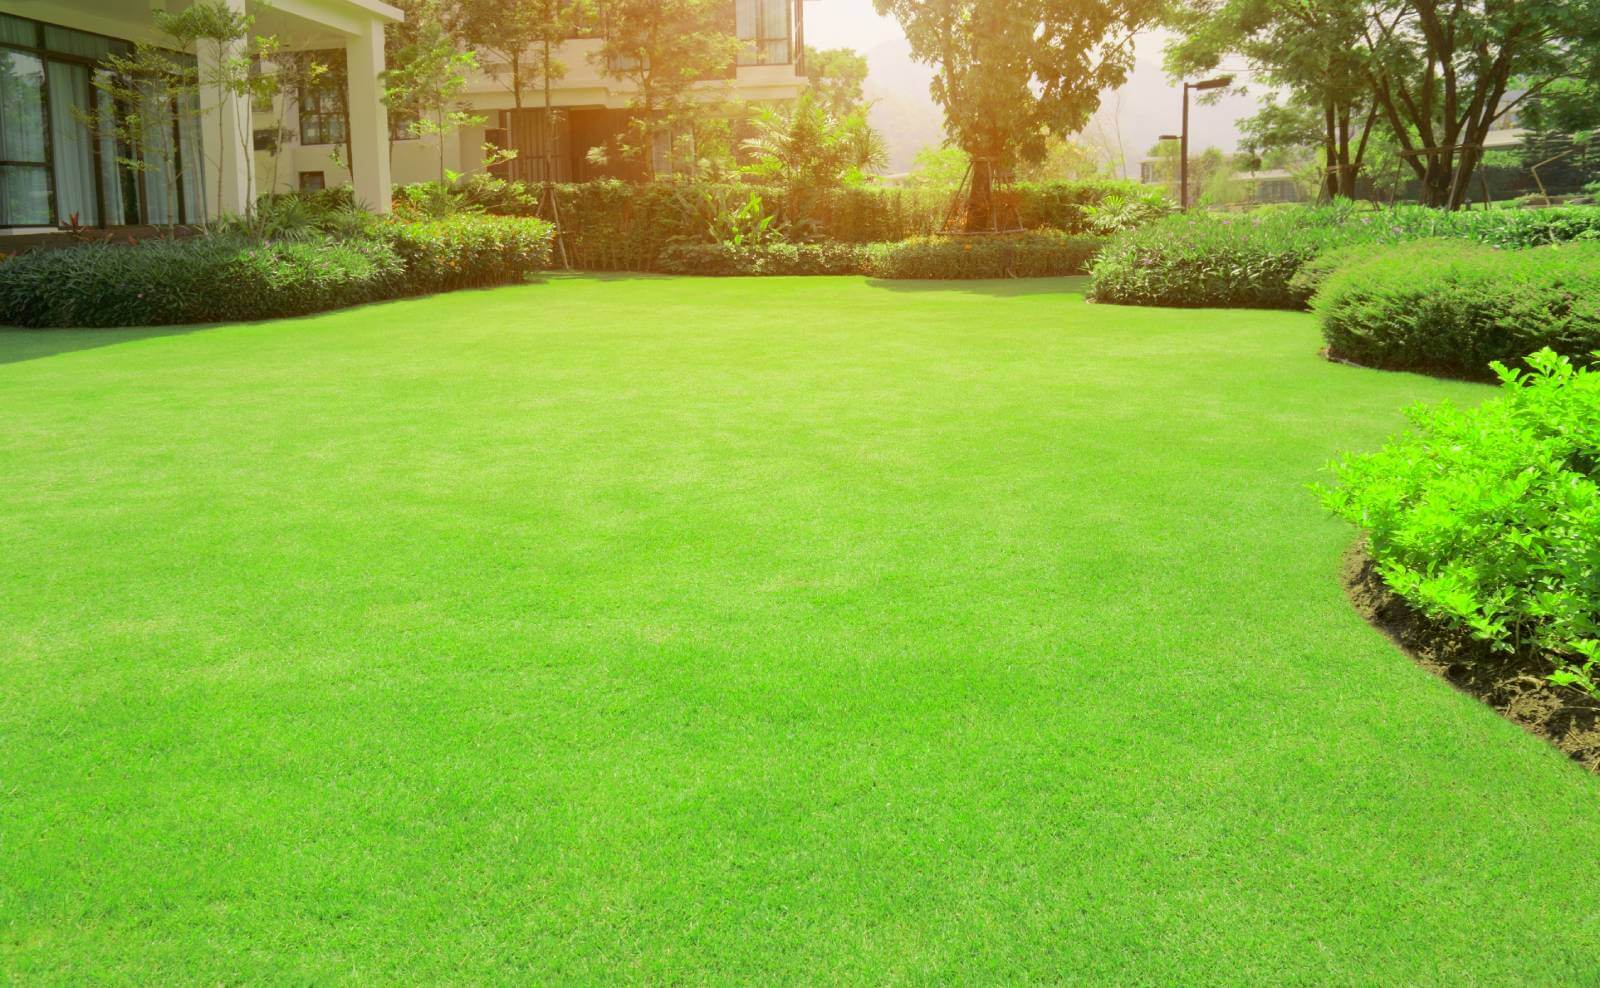 a beautifully maintained lawn, with lush green grass, manicured edges